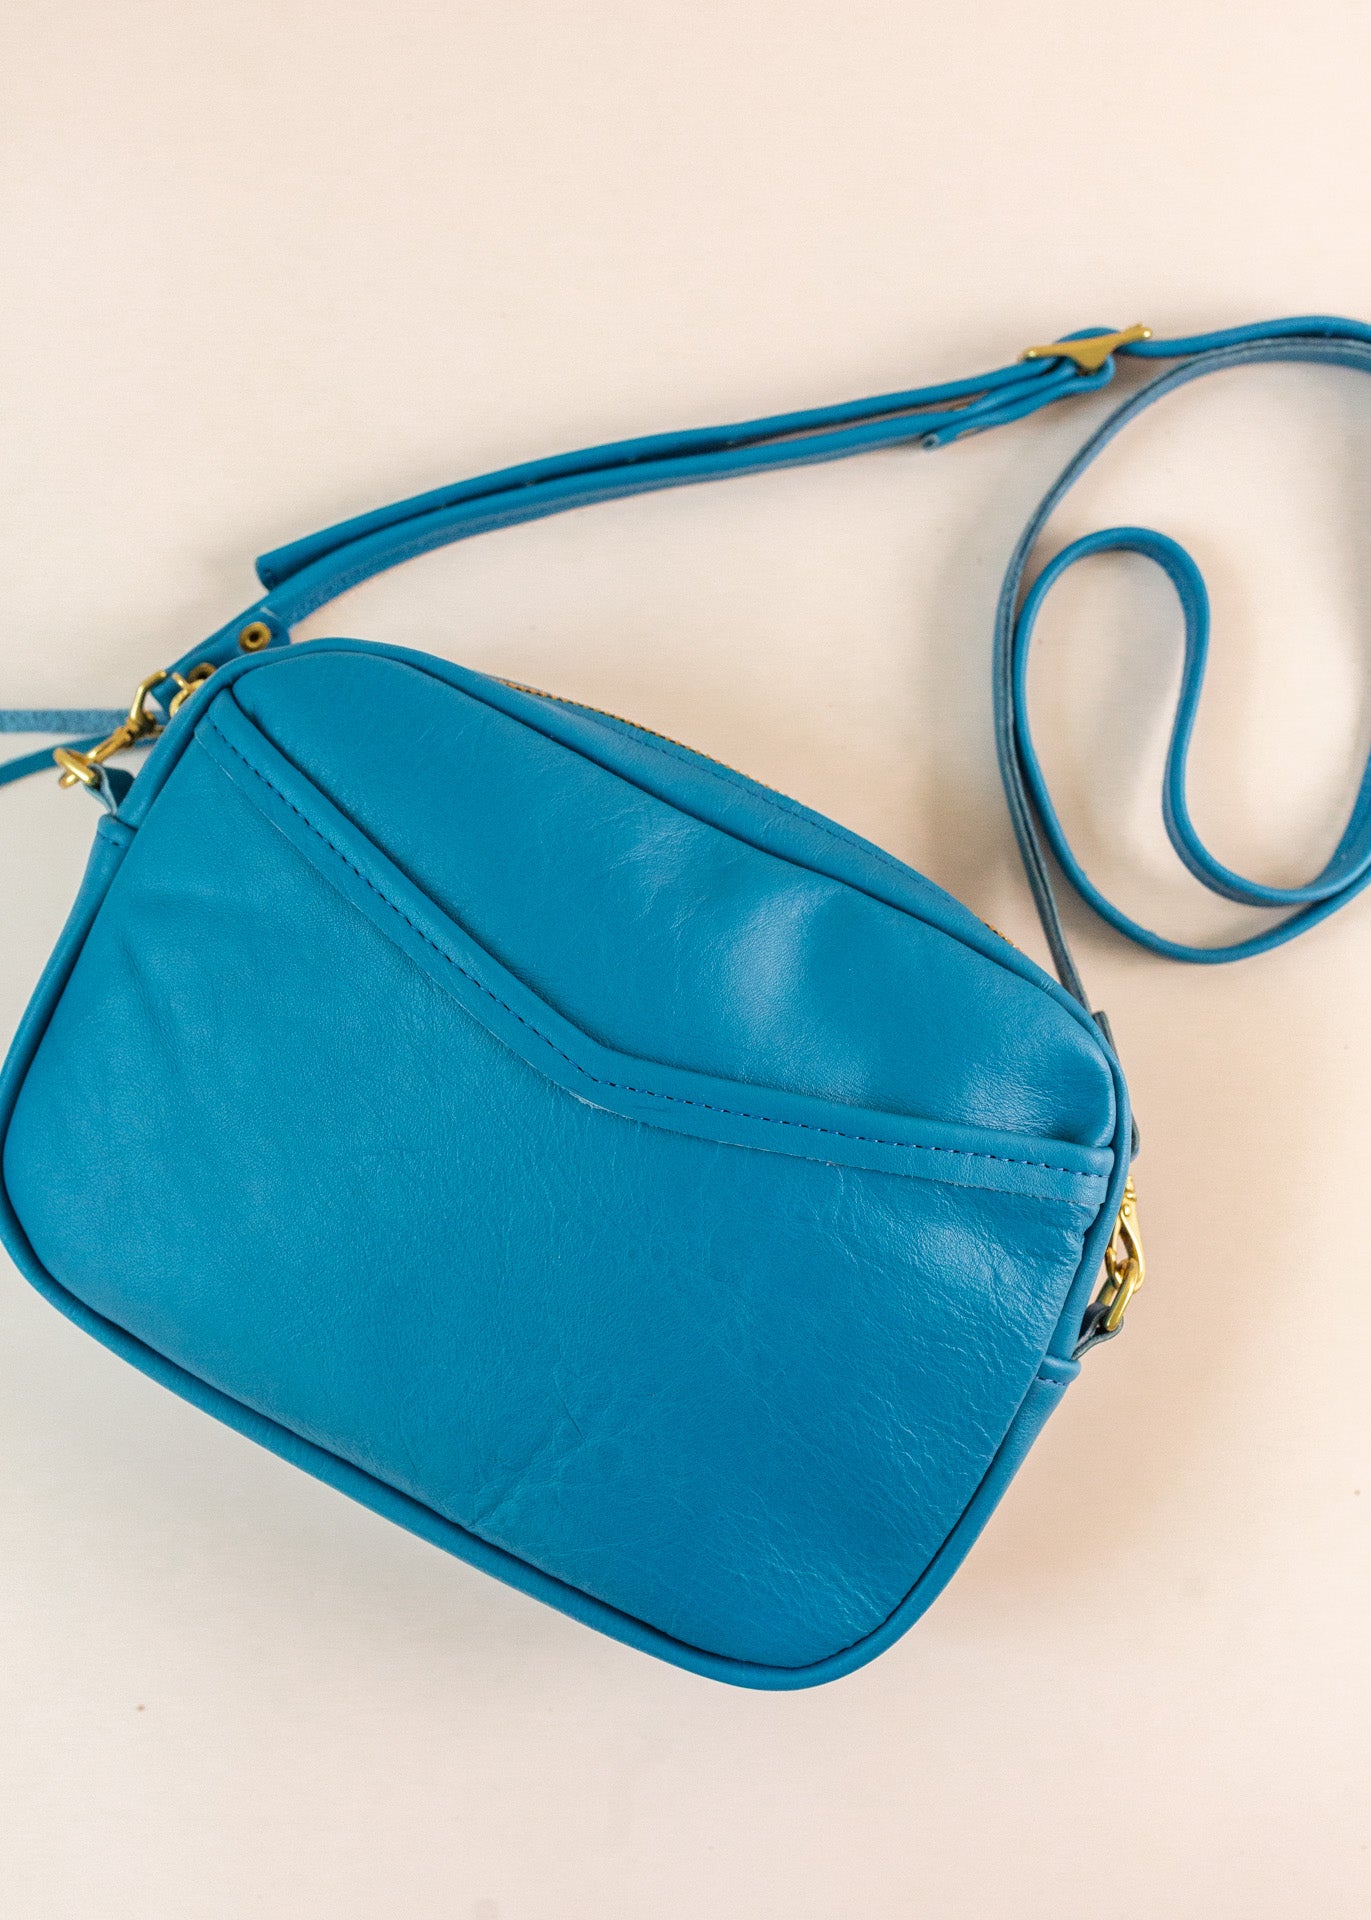 Flatlay of cubist handbag in azure, or blue, with a v-shaped front pocket and a long thin shoulder strap